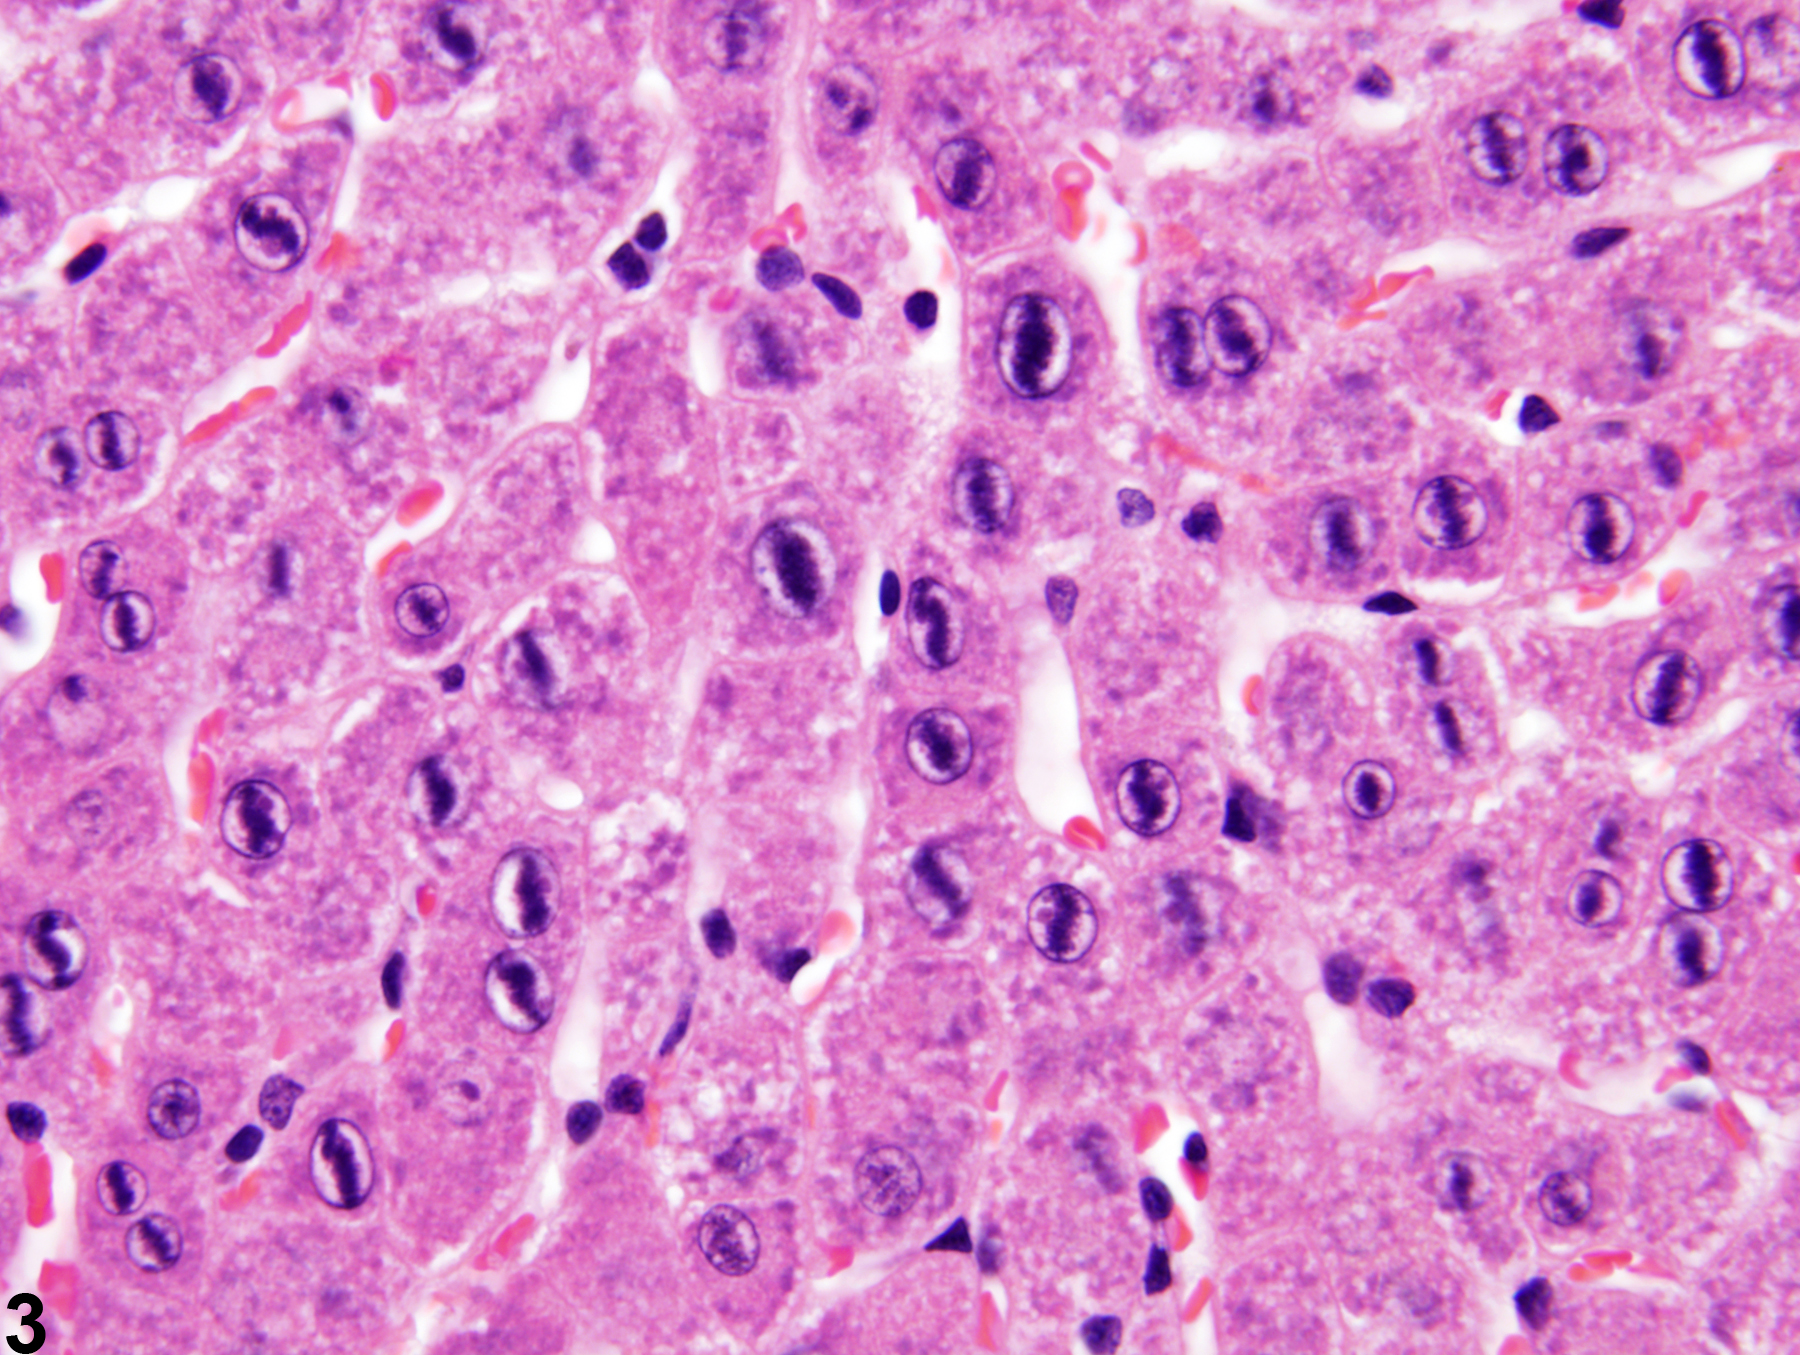 Image of hepatodiaphragmatic nodule in the liver from a female F344/N rat in a subchronic study